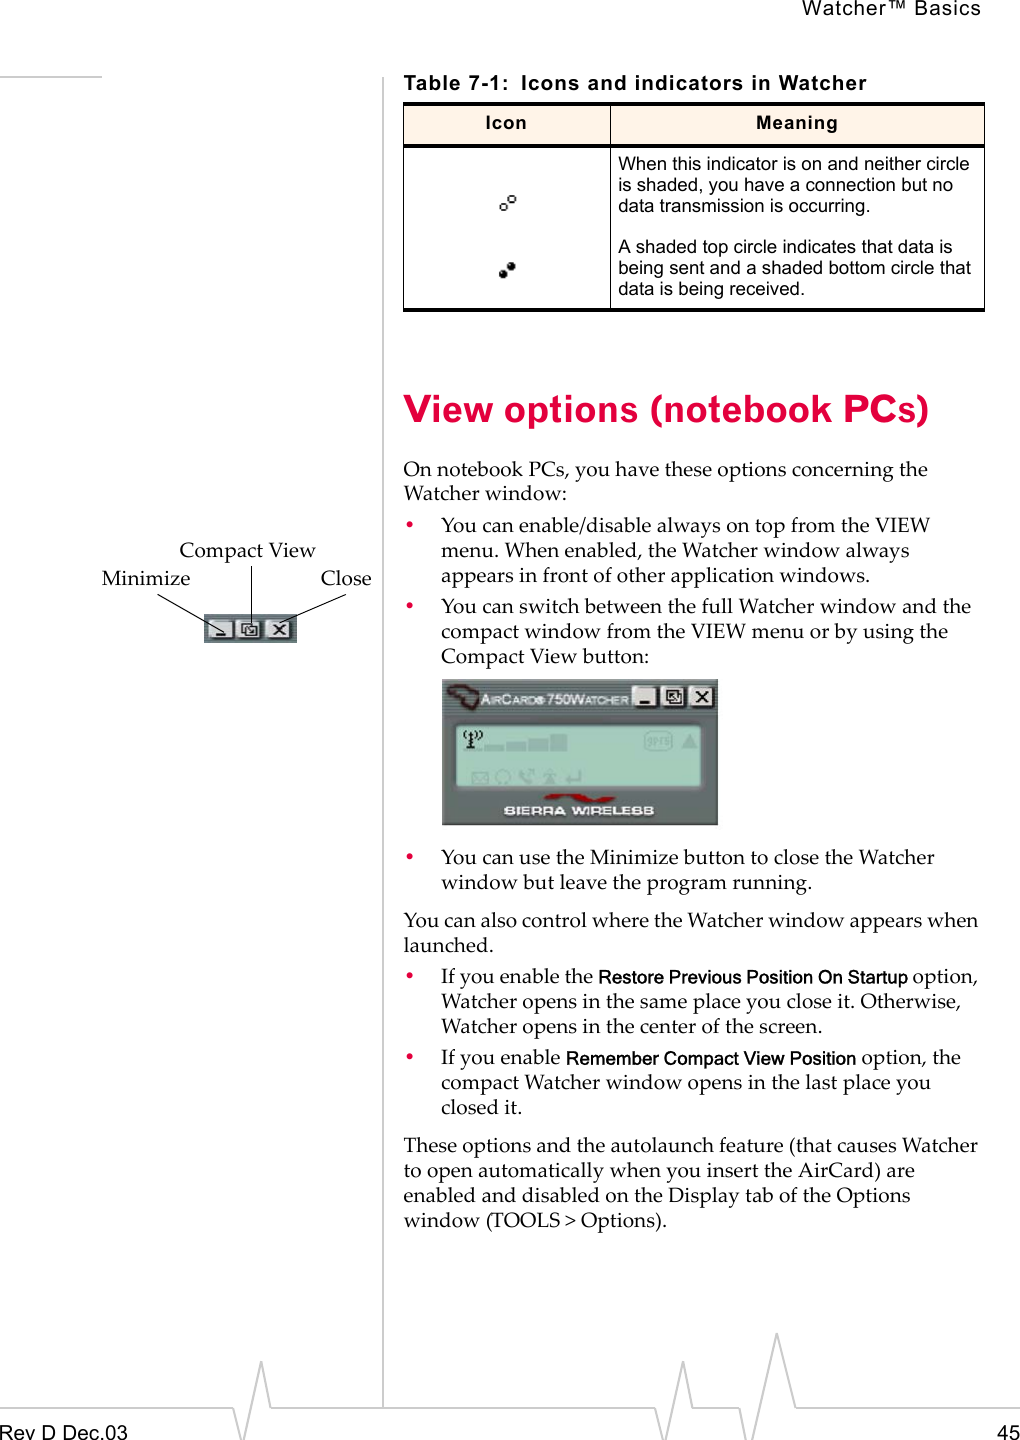 Watcher™ BasicsRev D Dec.03 45View options (notebook PCs)On notebook PCs, you have these options concerning the Watcher window:•You can enable/disable always on top from the VIEW menu. When enabled, the Watcher window always appears in front of other application windows.•You can switch between the full Watcher window and the compact window from the VIEW menu or by using the Compact View button:•You can use the Minimize button to close the Watcher window but leave the program running. You can also control where the Watcher window appears when launched. •If you enable the Restore Previous Position On Startup option, Watcher opens in the same place you close it. Otherwise, Watcher opens in the center of the screen.•If you enable Remember Compact View Position option, the compact Watcher window opens in the last place you closed it.These options and the autolaunch feature (that causes Watcher to open automatically when you insert the AirCard) are enabled and disabled on the Display tab of the Options window (TOOLS &gt; Options).When this indicator is on and neither circle is shaded, you have a connection but no data transmission is occurring.A shaded top circle indicates that data is being sent and a shaded bottom circle that data is being received.Table 7-1: Icons and indicators in WatcherIcon Meaning               Compact ViewMinimize                         Close